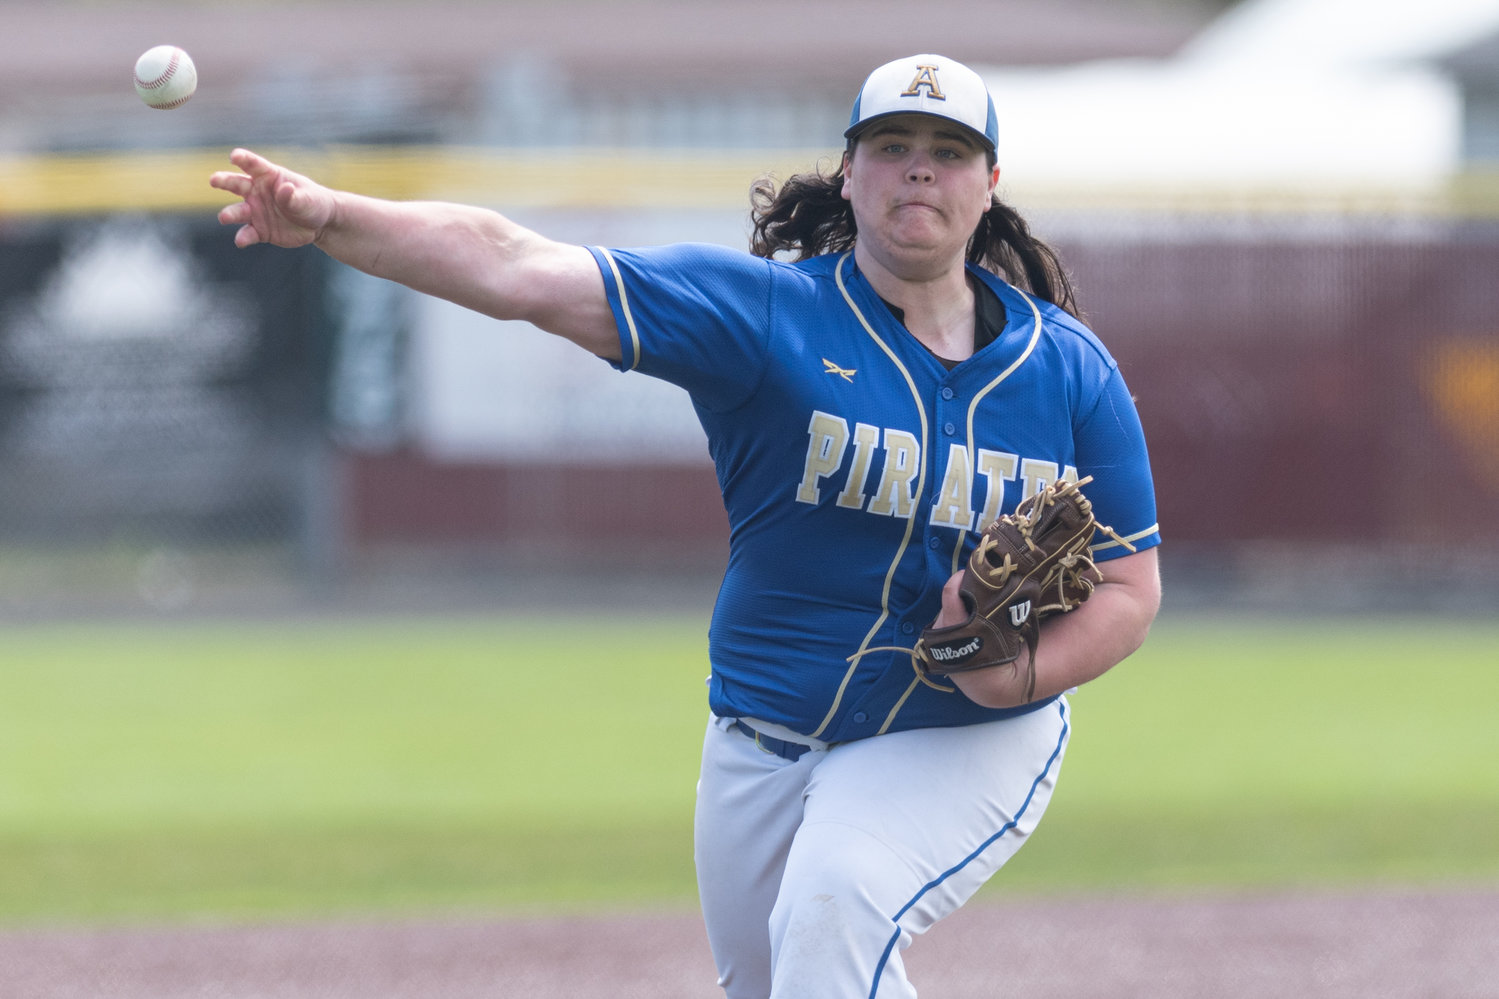 Adna pitcher Ryan Wickert releases a pitch against Ocosta in the District 4 playoffs at Shelton High School May 7.